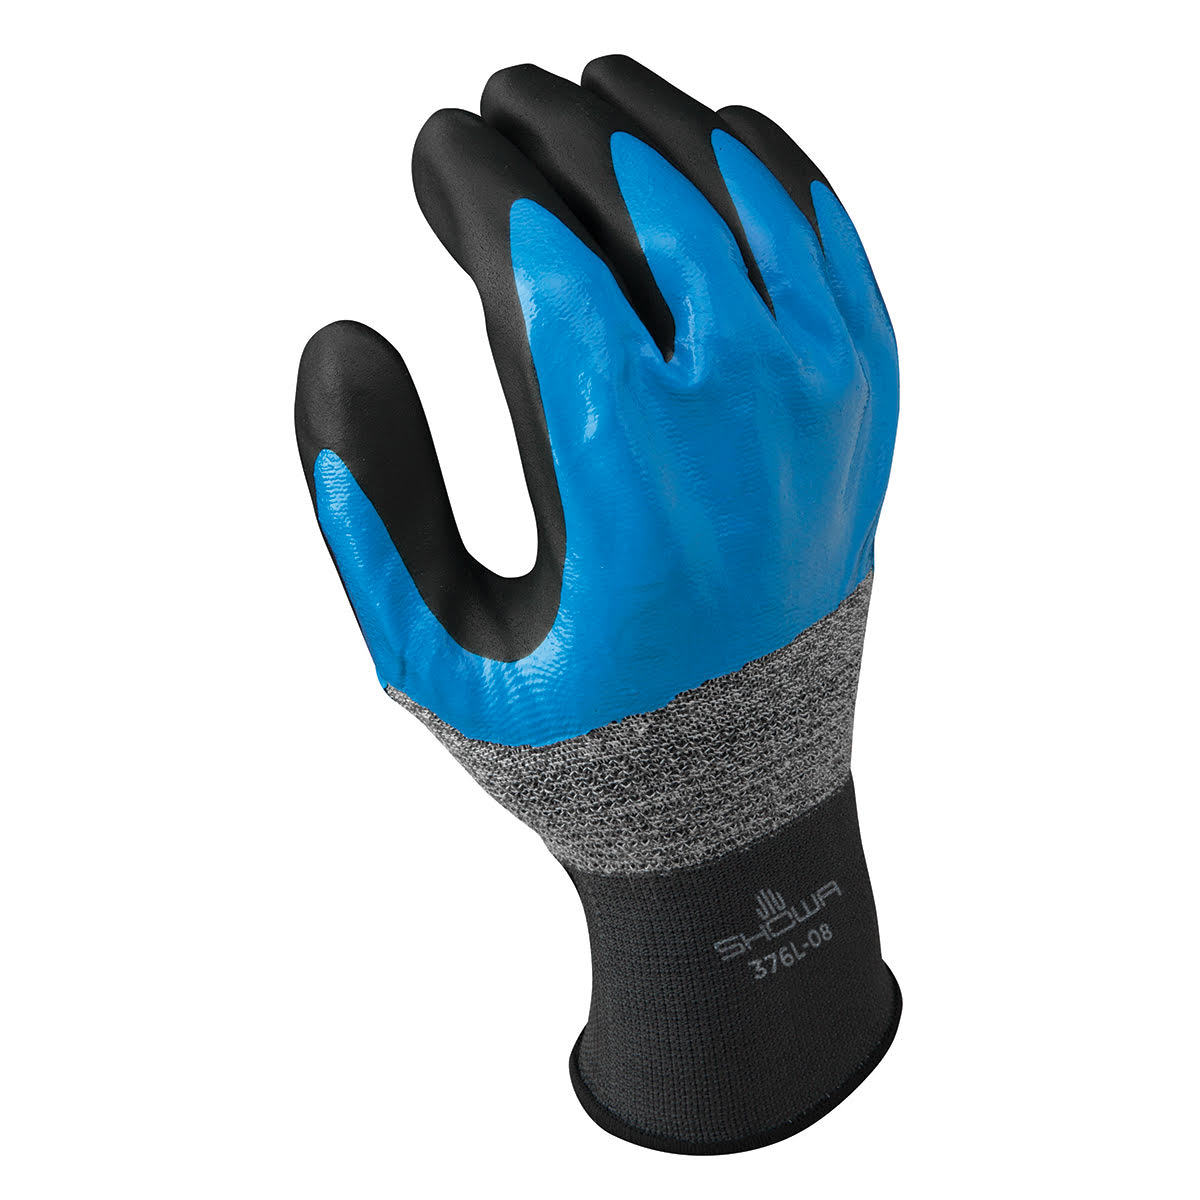 buy showa safety gloves and products in bulk online at autumn supply